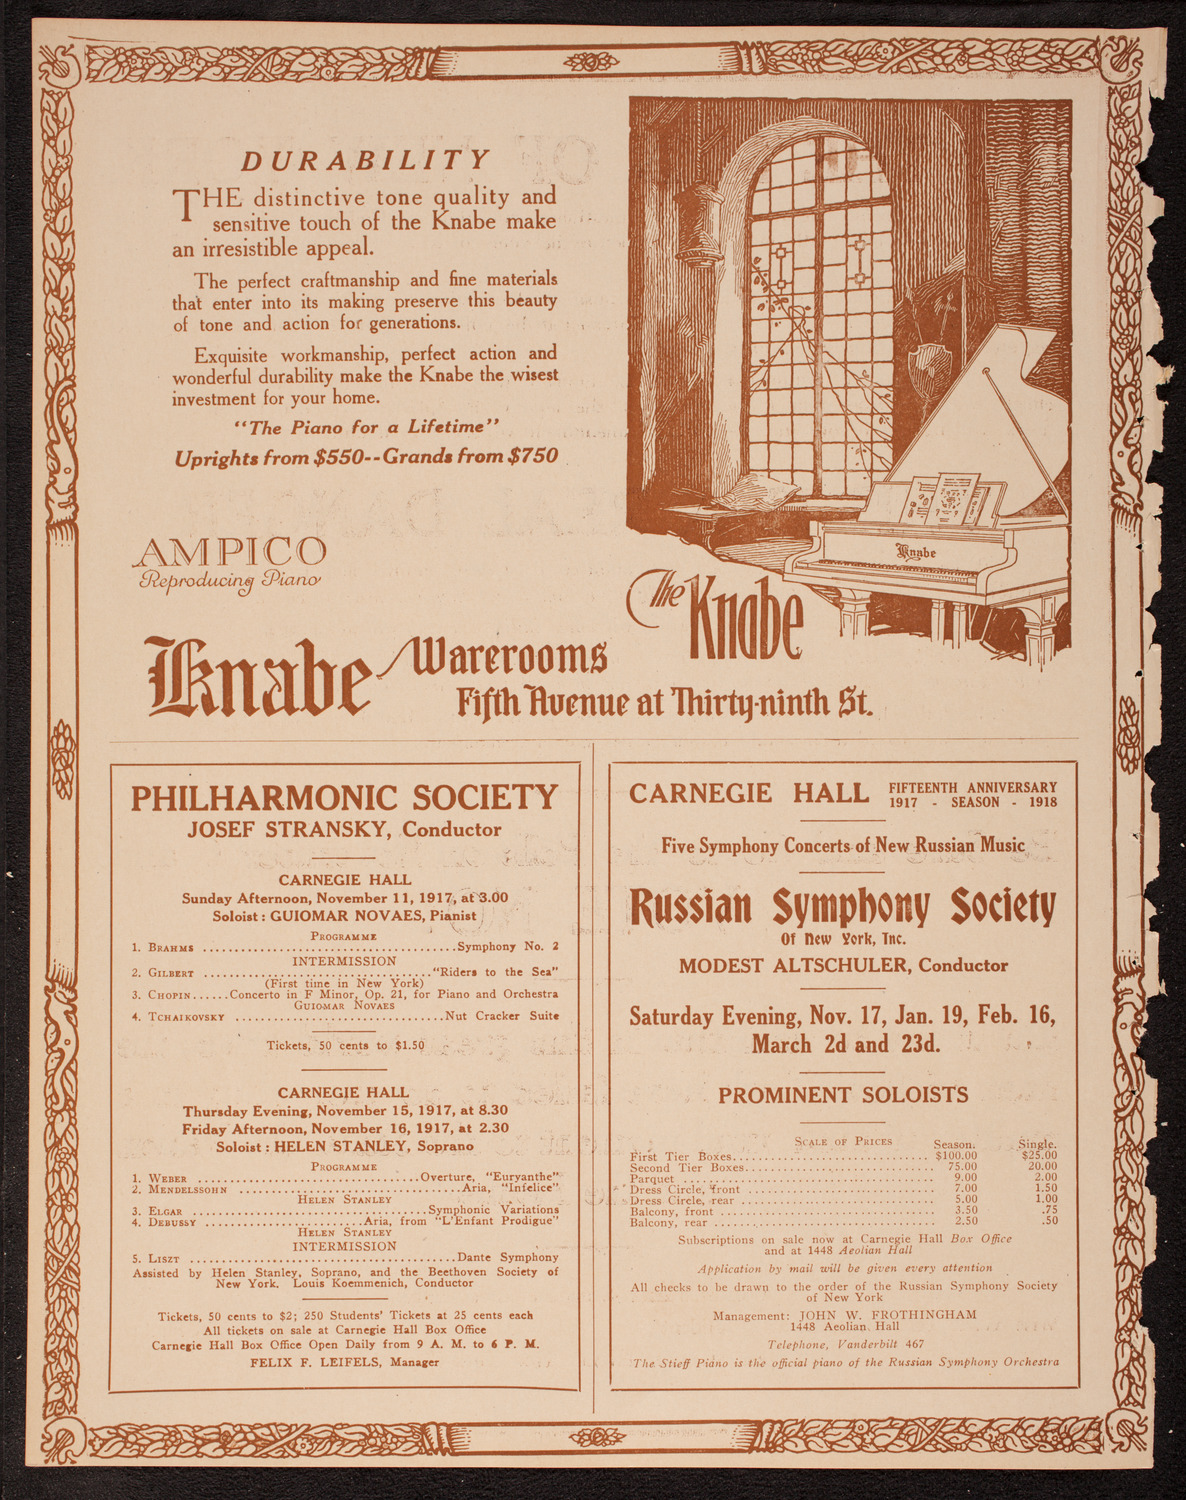 Benefit: N.Y. State Association Opposed to Woman Suffrage, November 3, 1917, program page 12